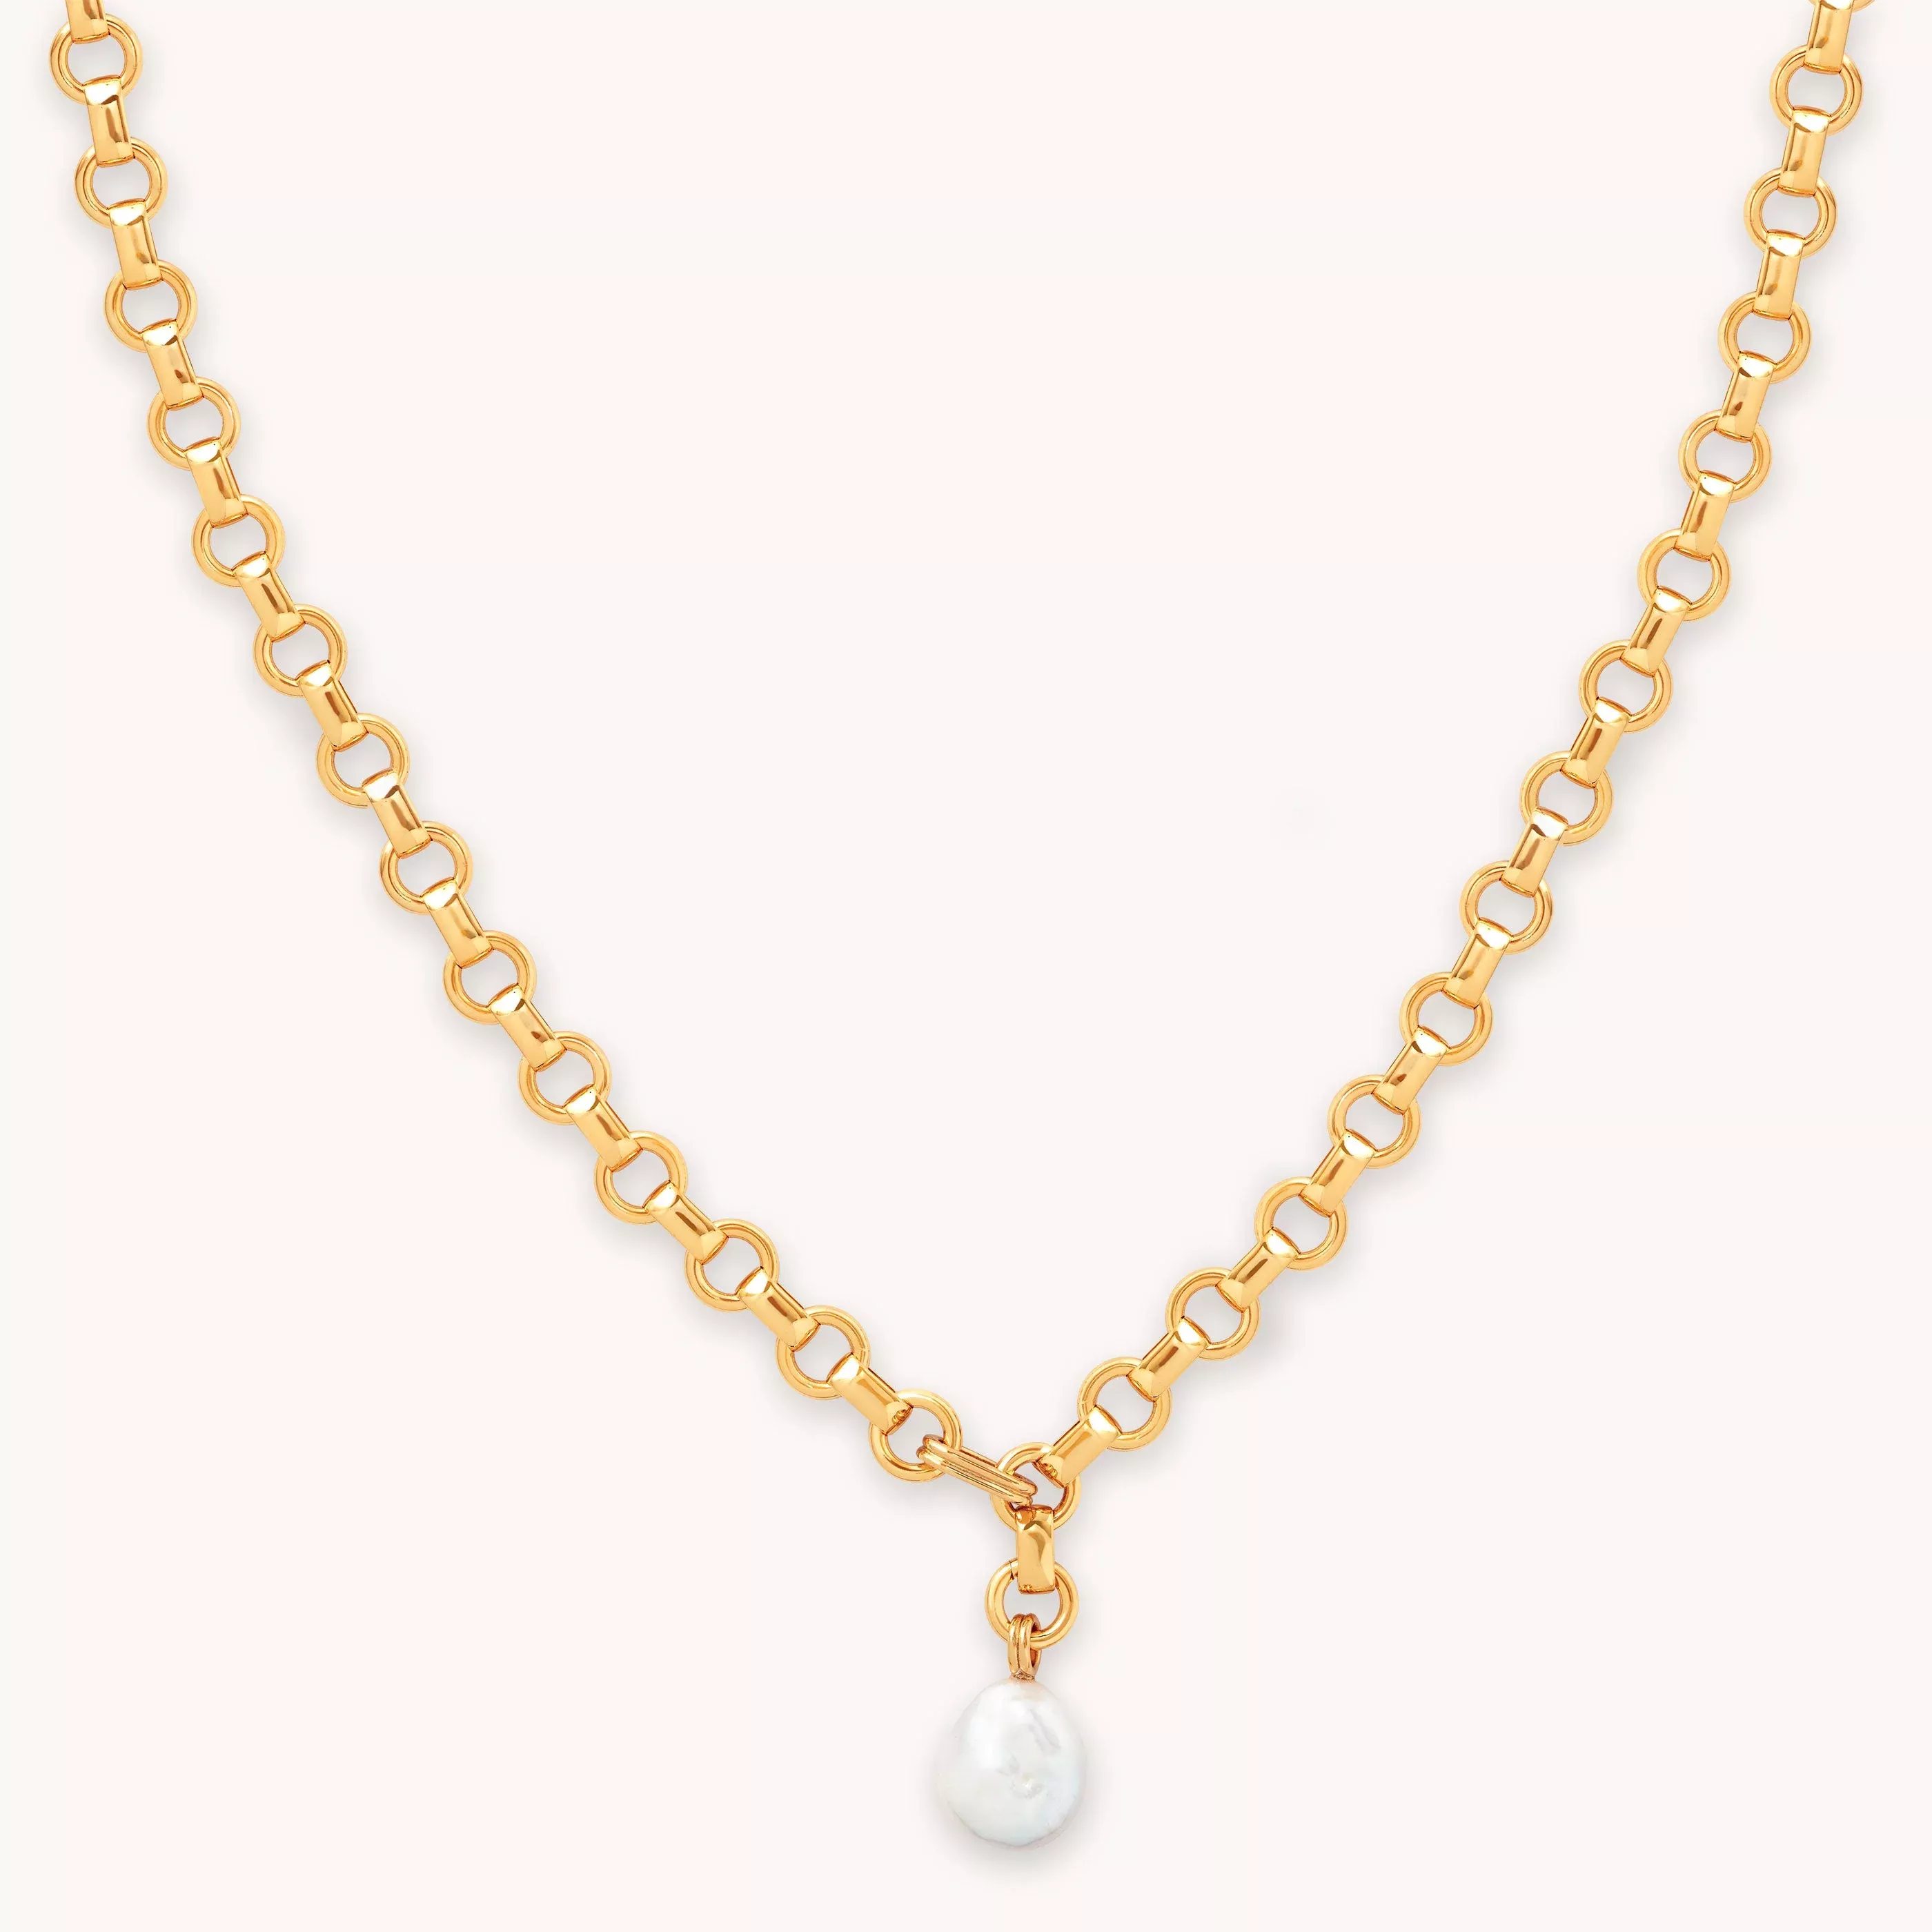 Secret Treasures Gold Pearl Layered Necklace